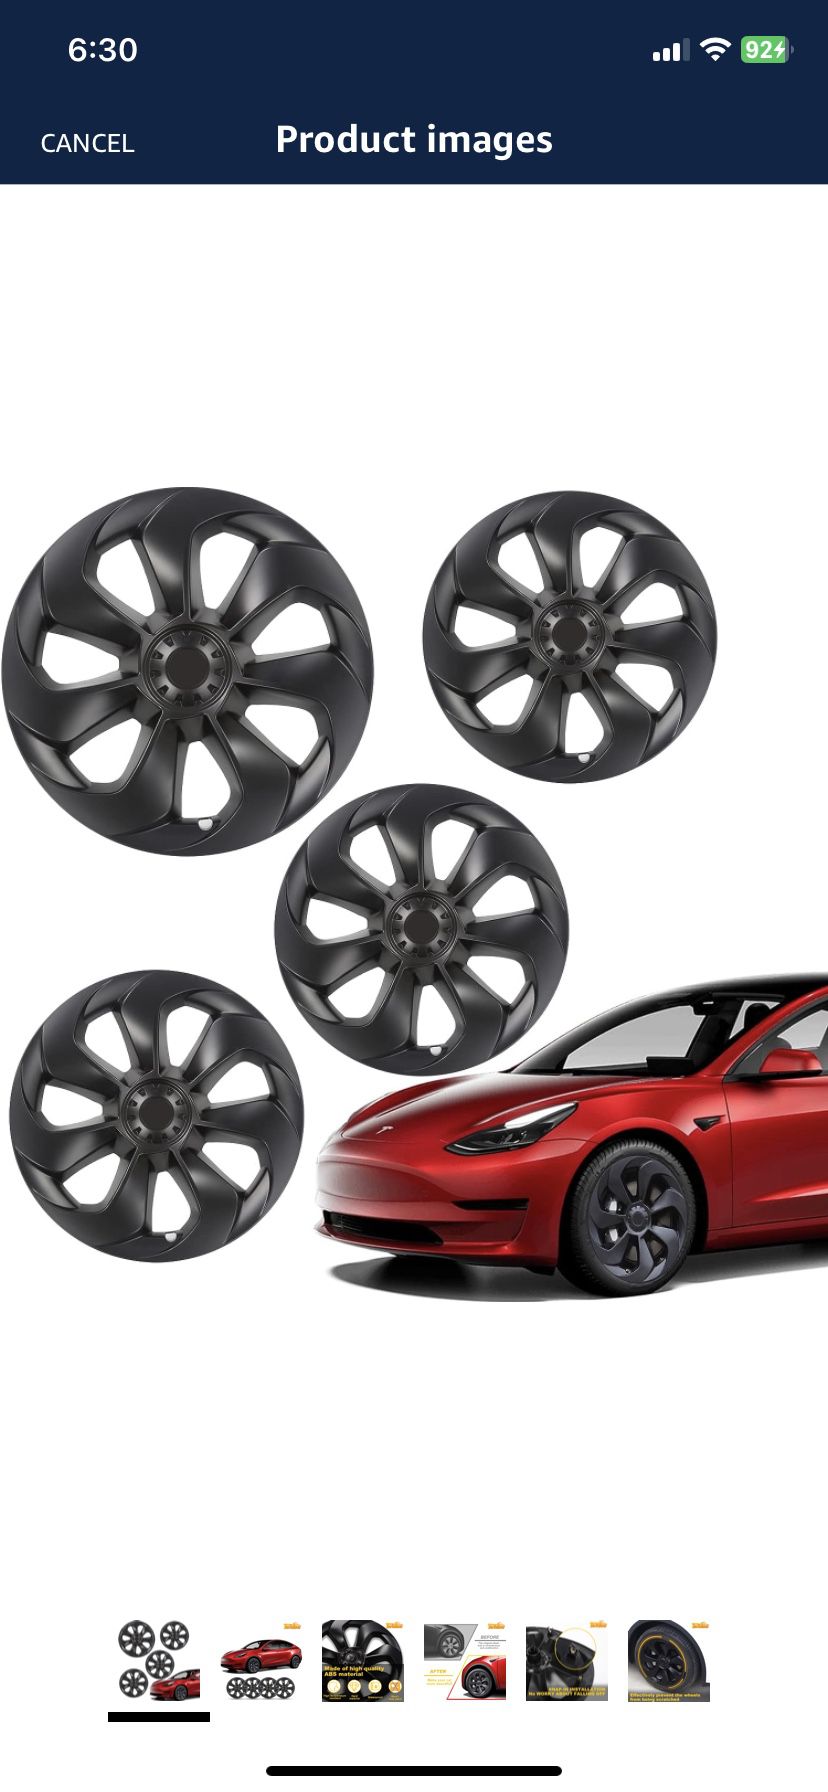 Model Y Wheel Covers/Hubcaps 19 Inch for 2019-2023 Tesla Model Y - Set of 4 Replacement Hub Caps for Stylish Car Decoration and Protection